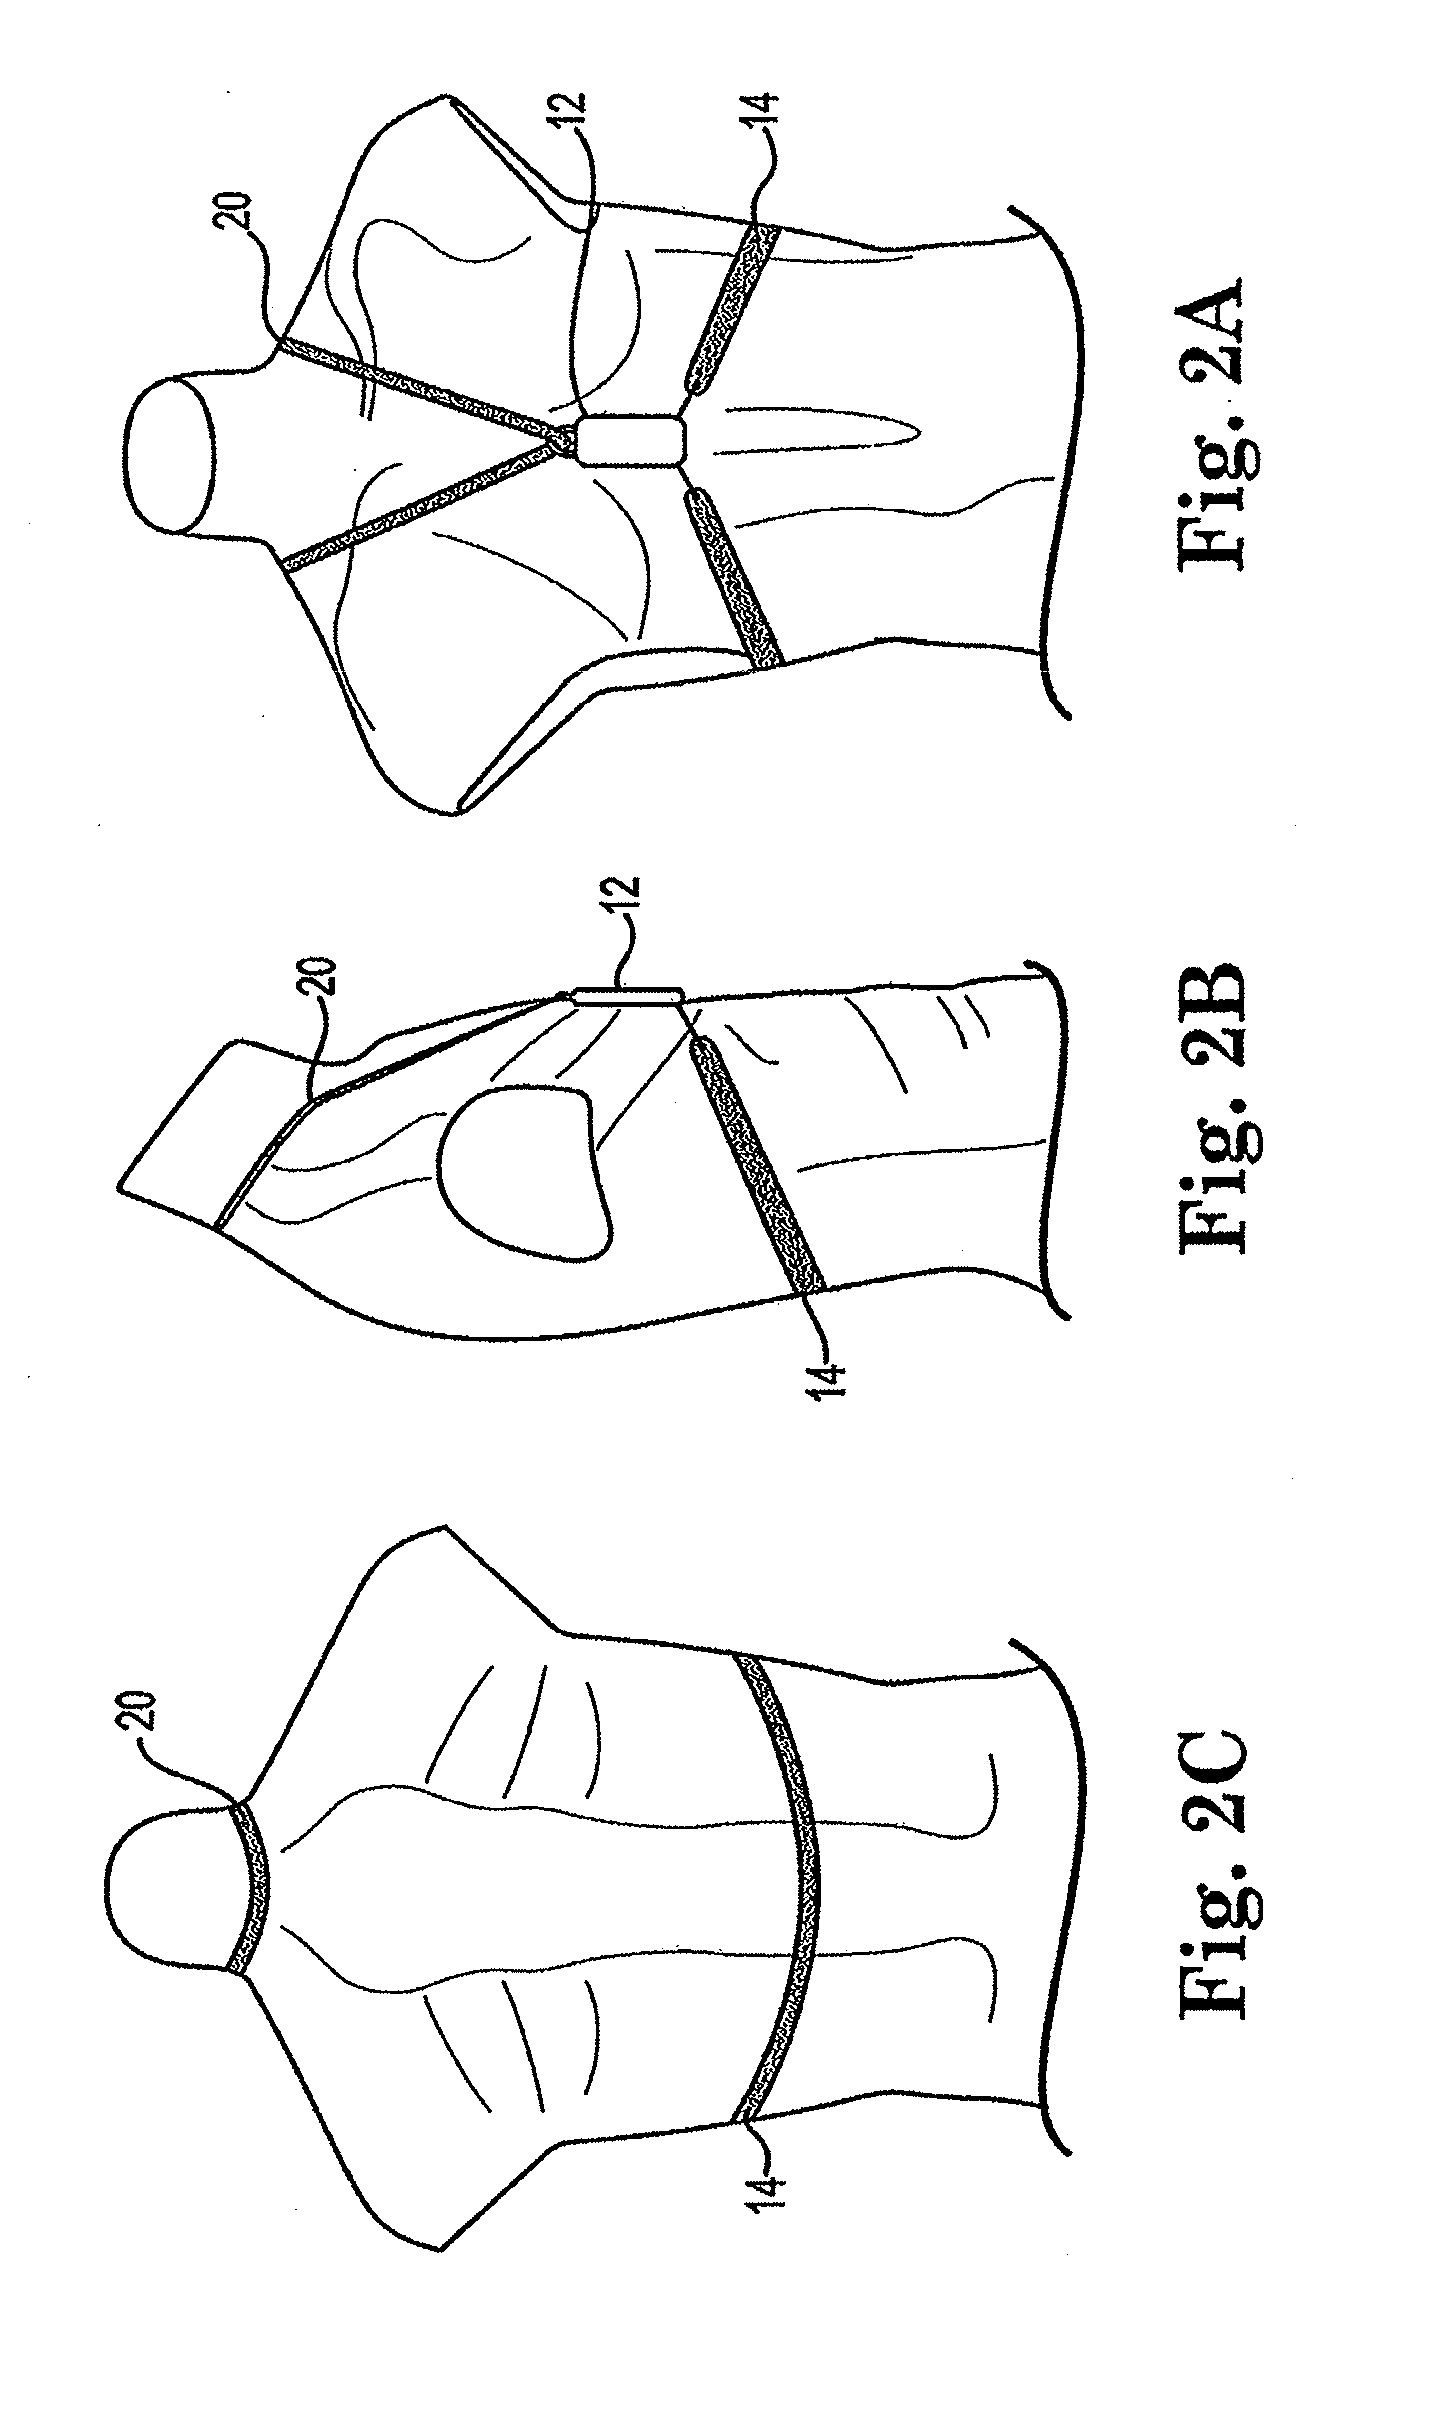 Breath volume monitoring system and method